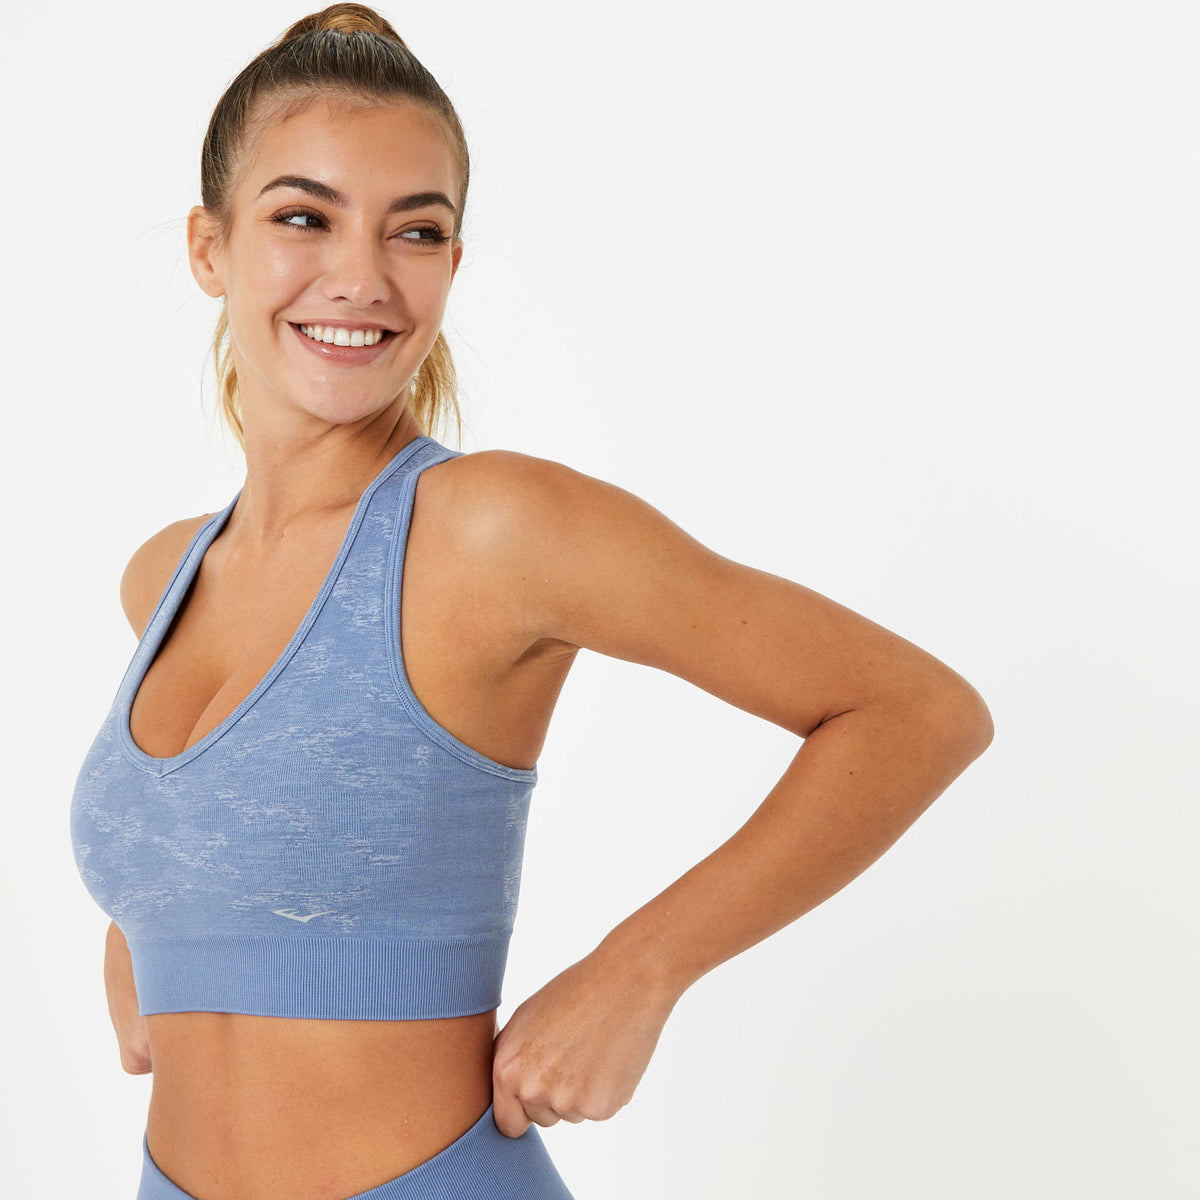 Everlast Branded Cut Out Sports Bra Teal, £6.00